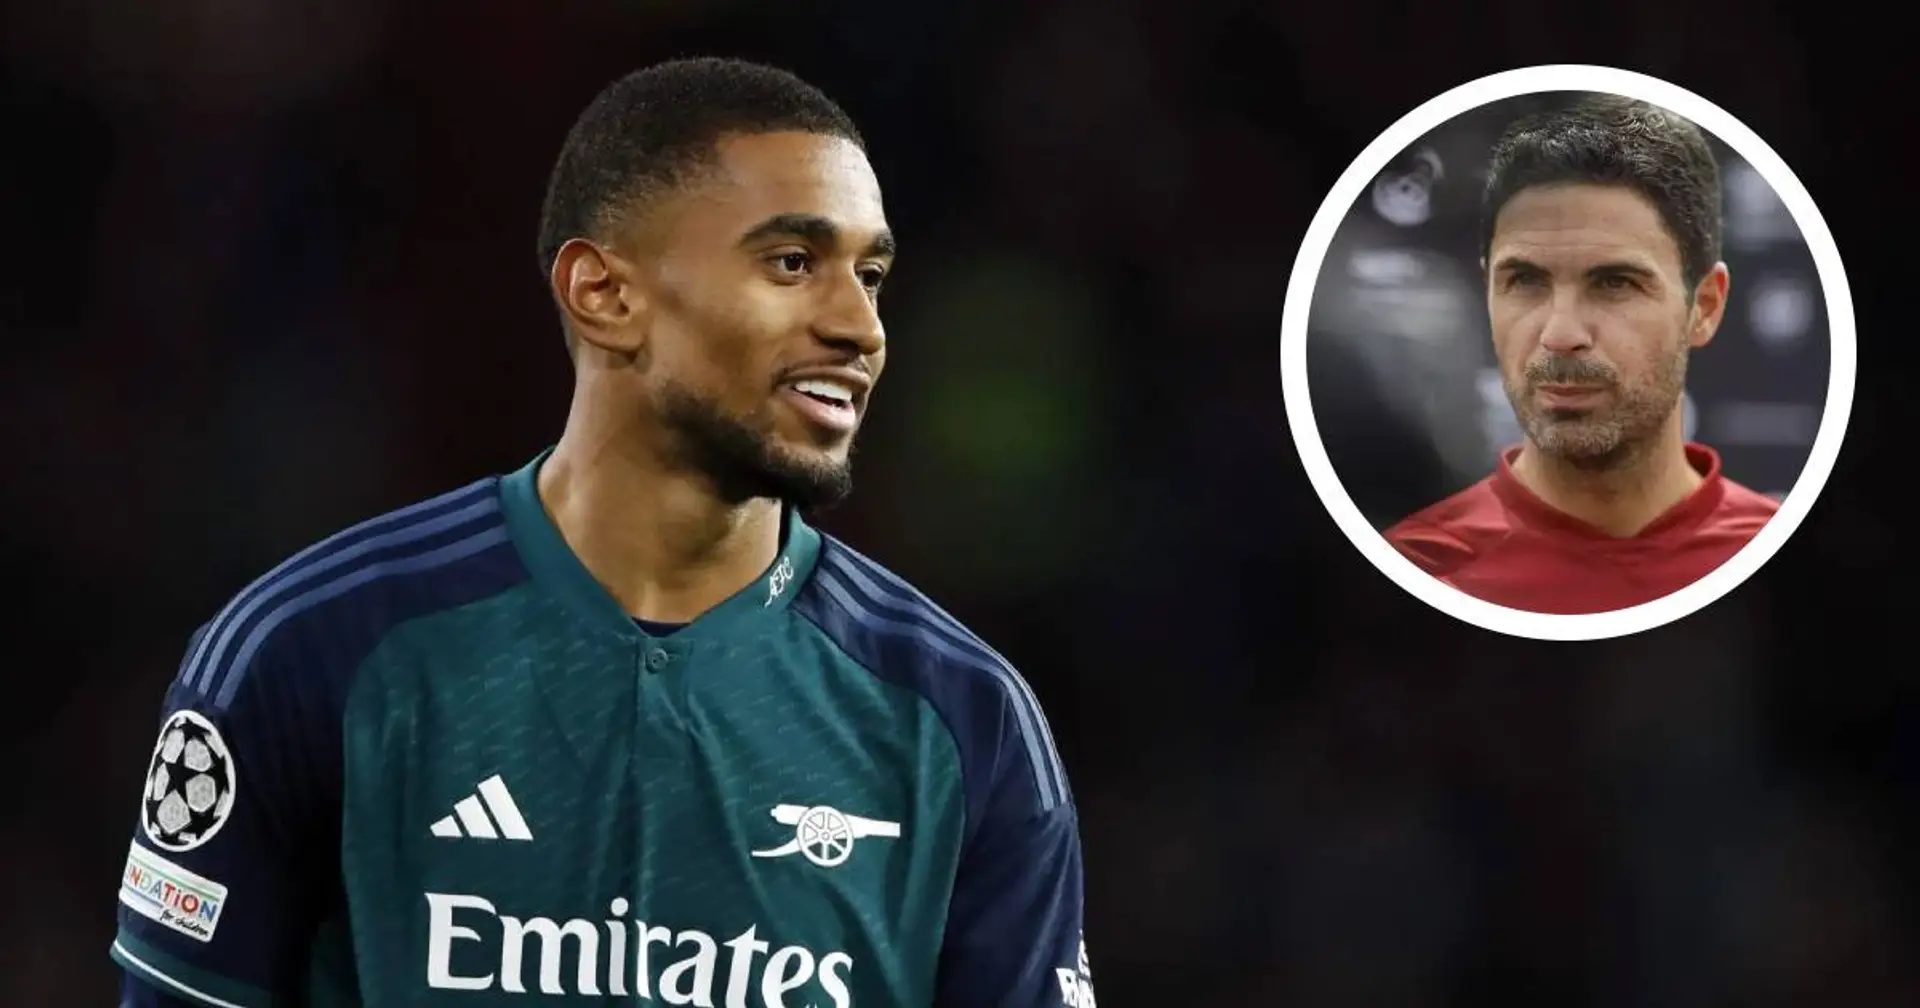 Mikel Arteta sparks injury fear about Reiss Nelson after impressive show